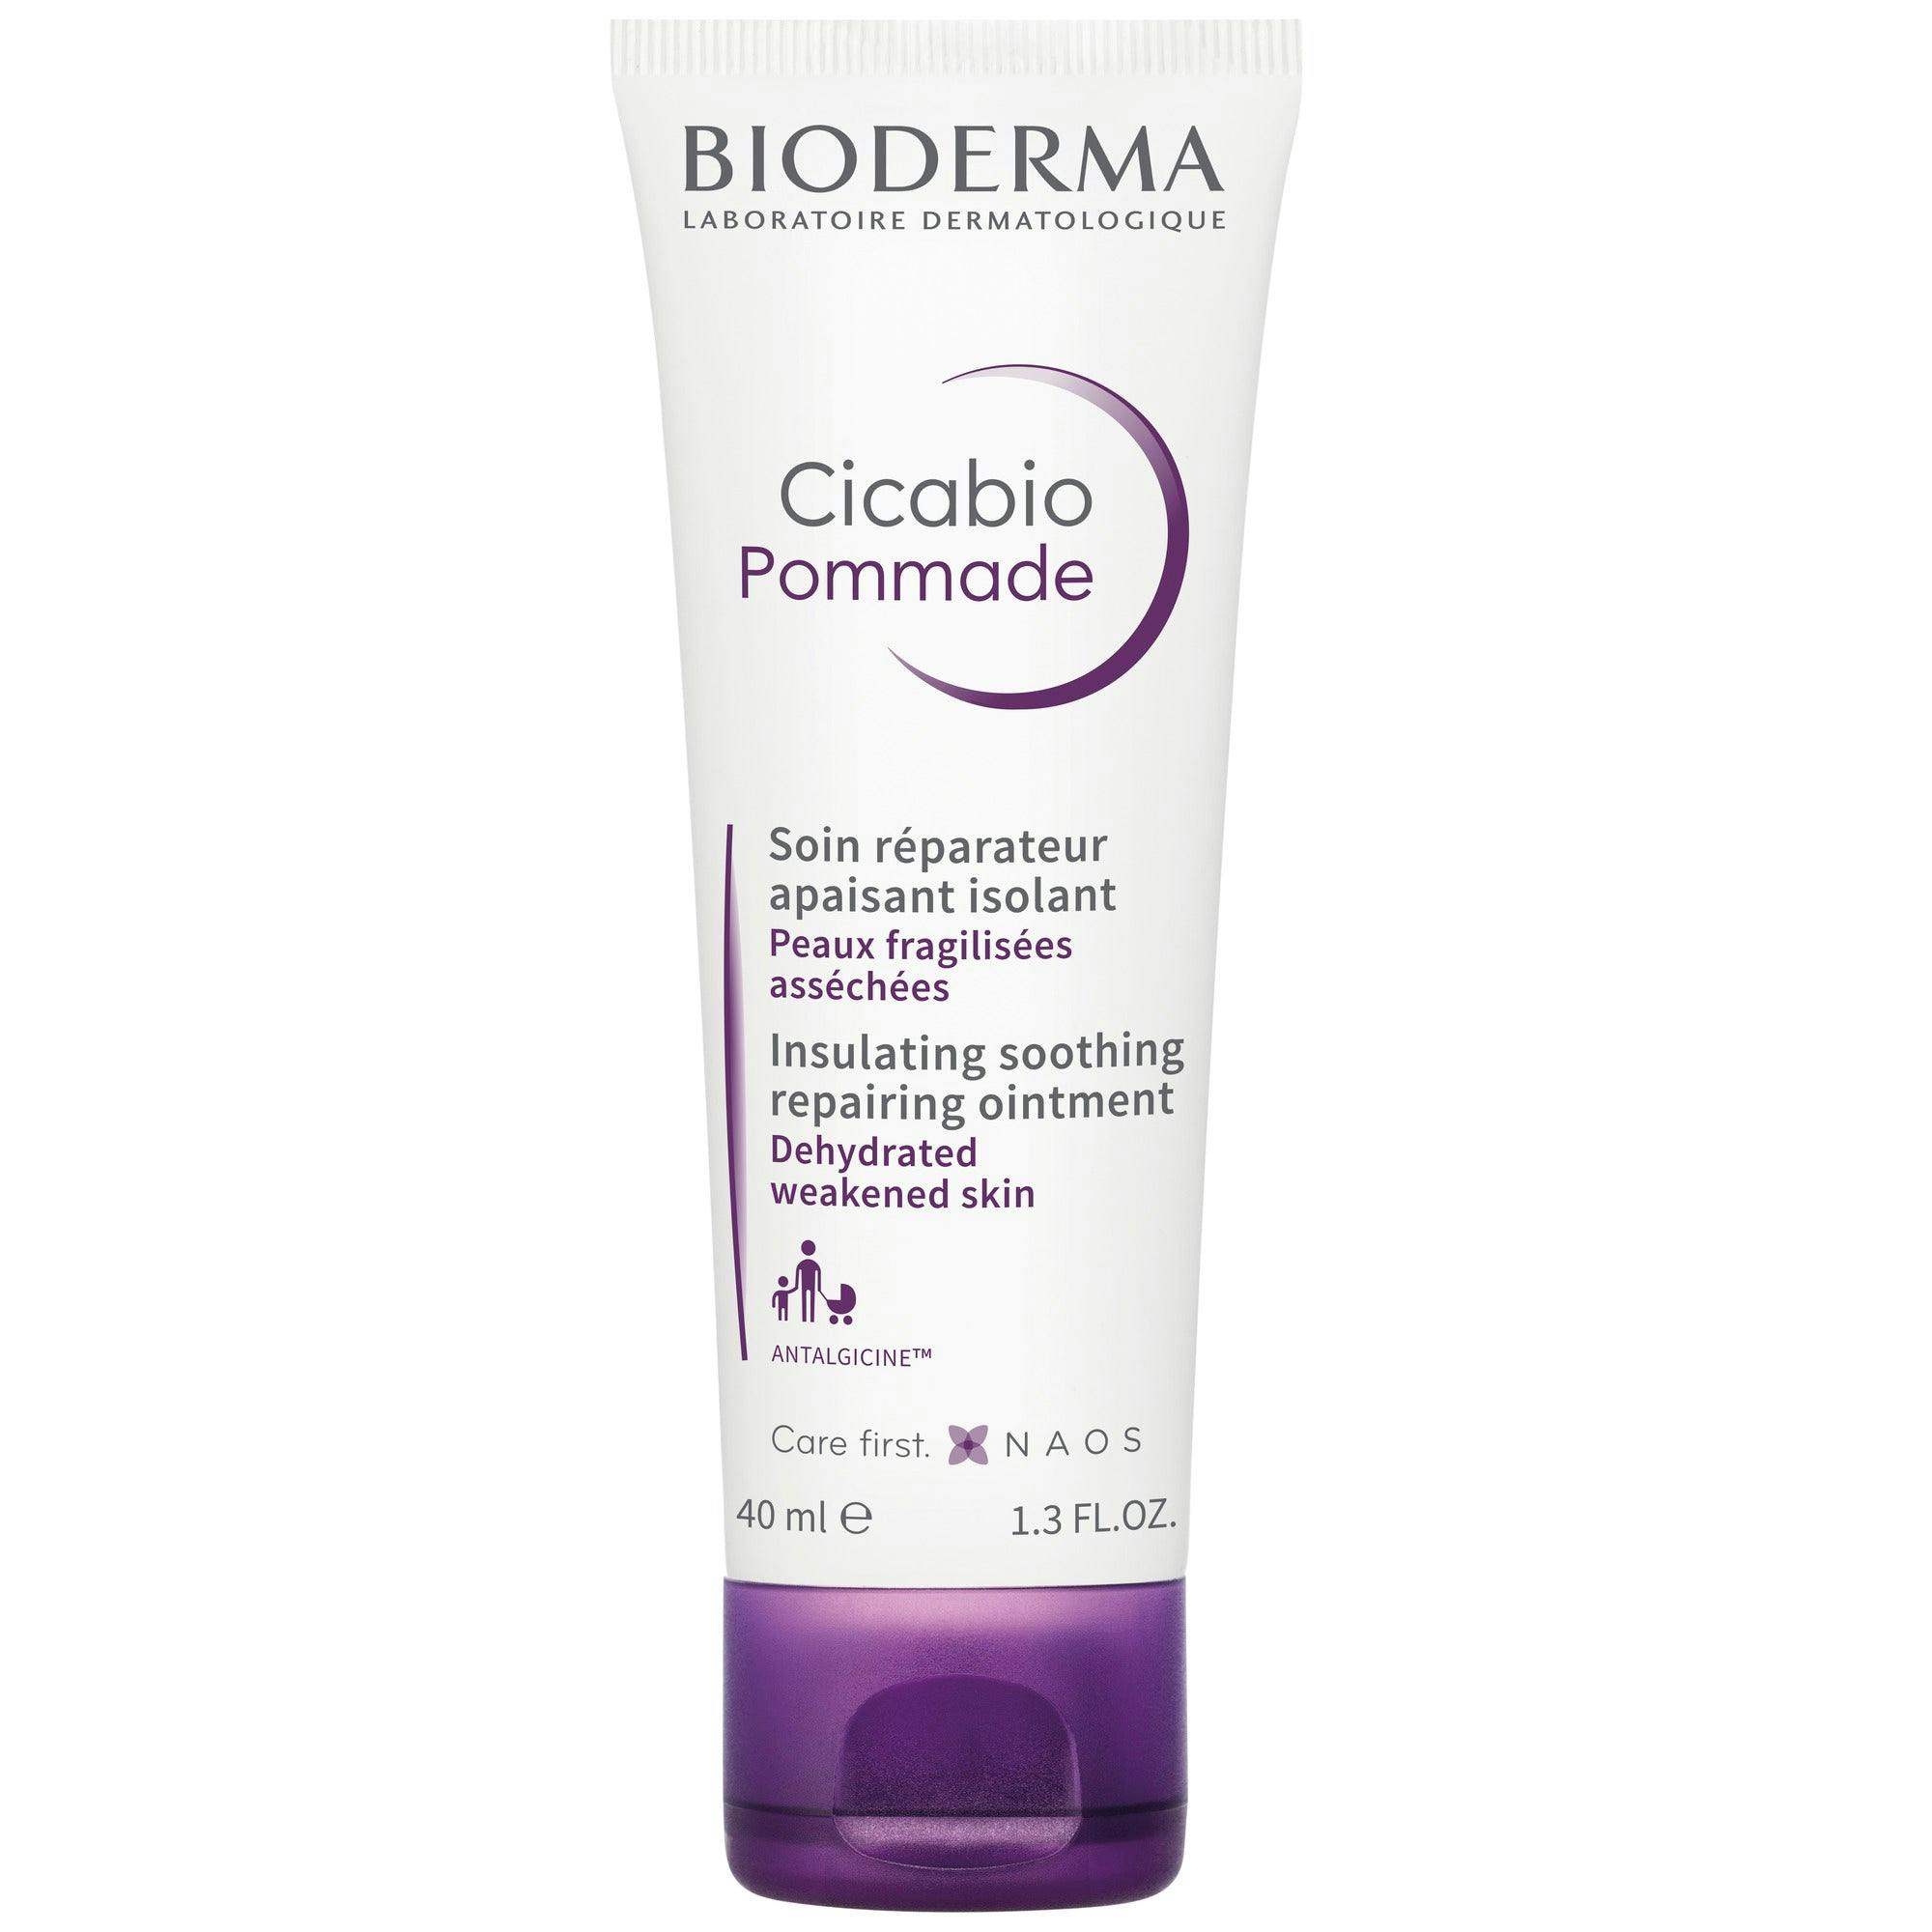 Bioderma Cicabio Pommade Soothing Repairing Ointment 40ml